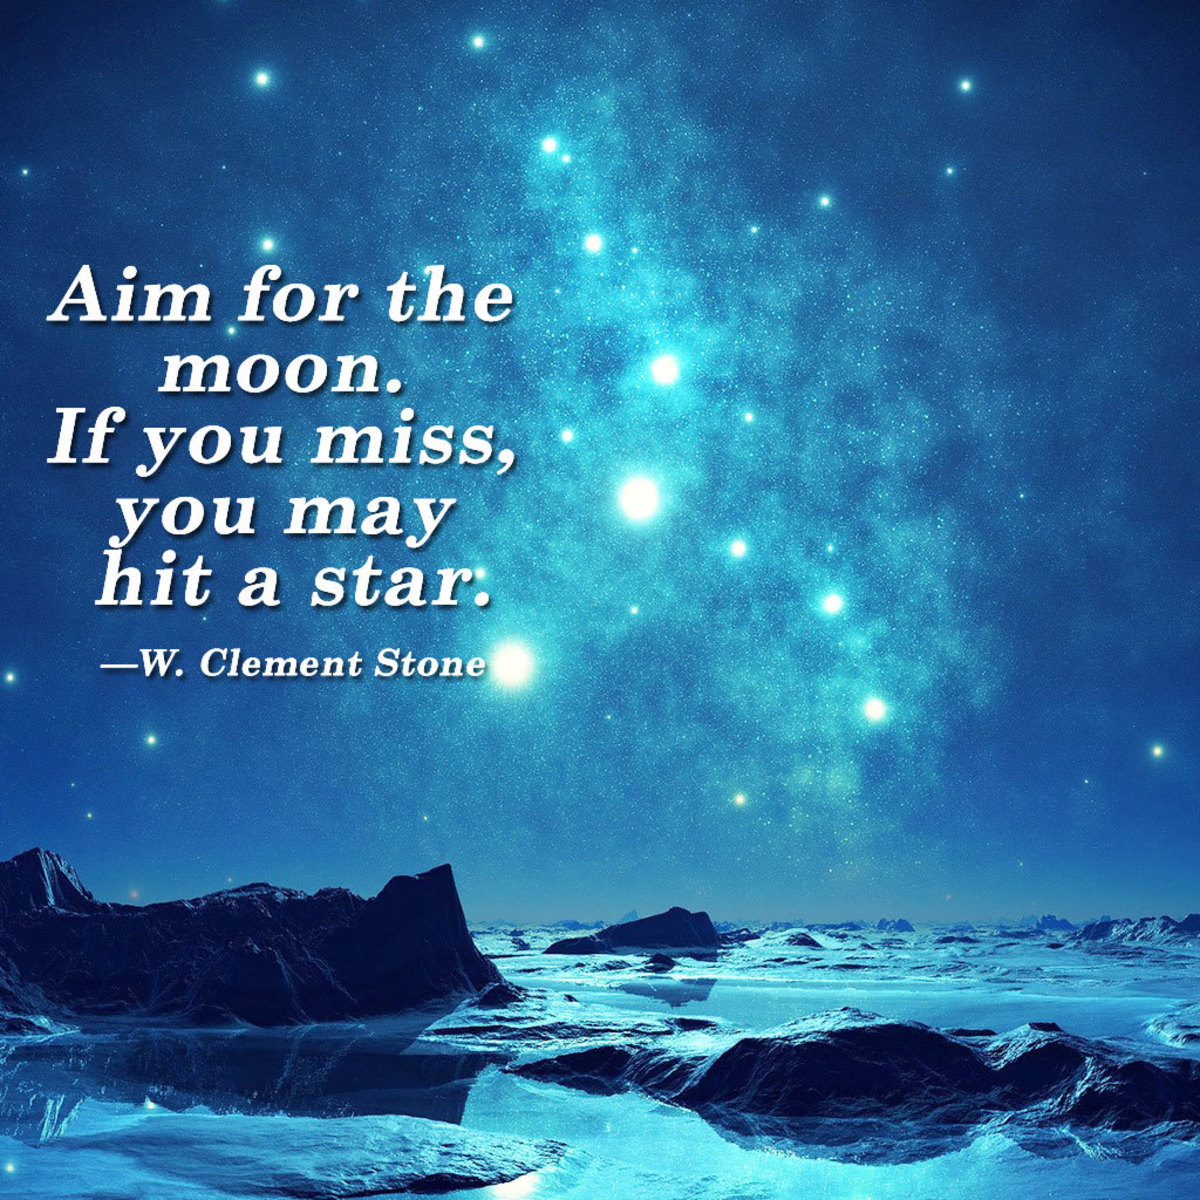 “Aim for the moon. If you miss, you may hit a star.” —W. Clement Stone